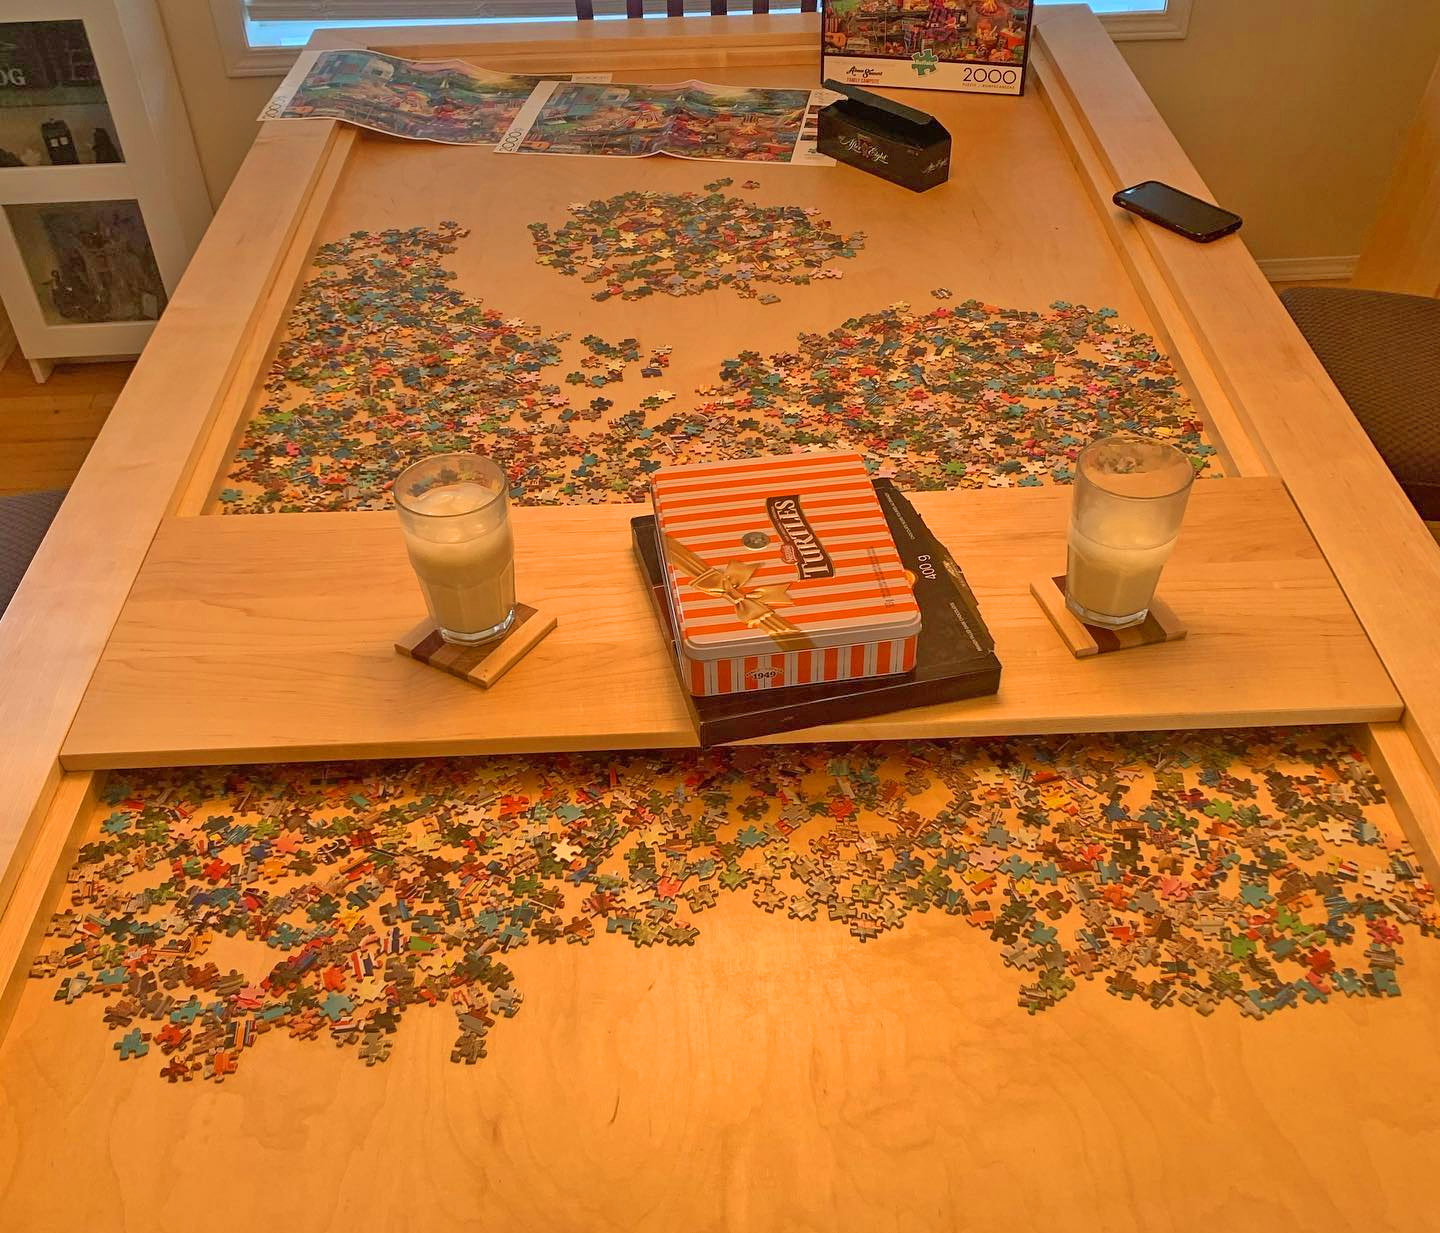 This Amazing Dining Table Has a Hidden Game/Puzzle Compartment Under